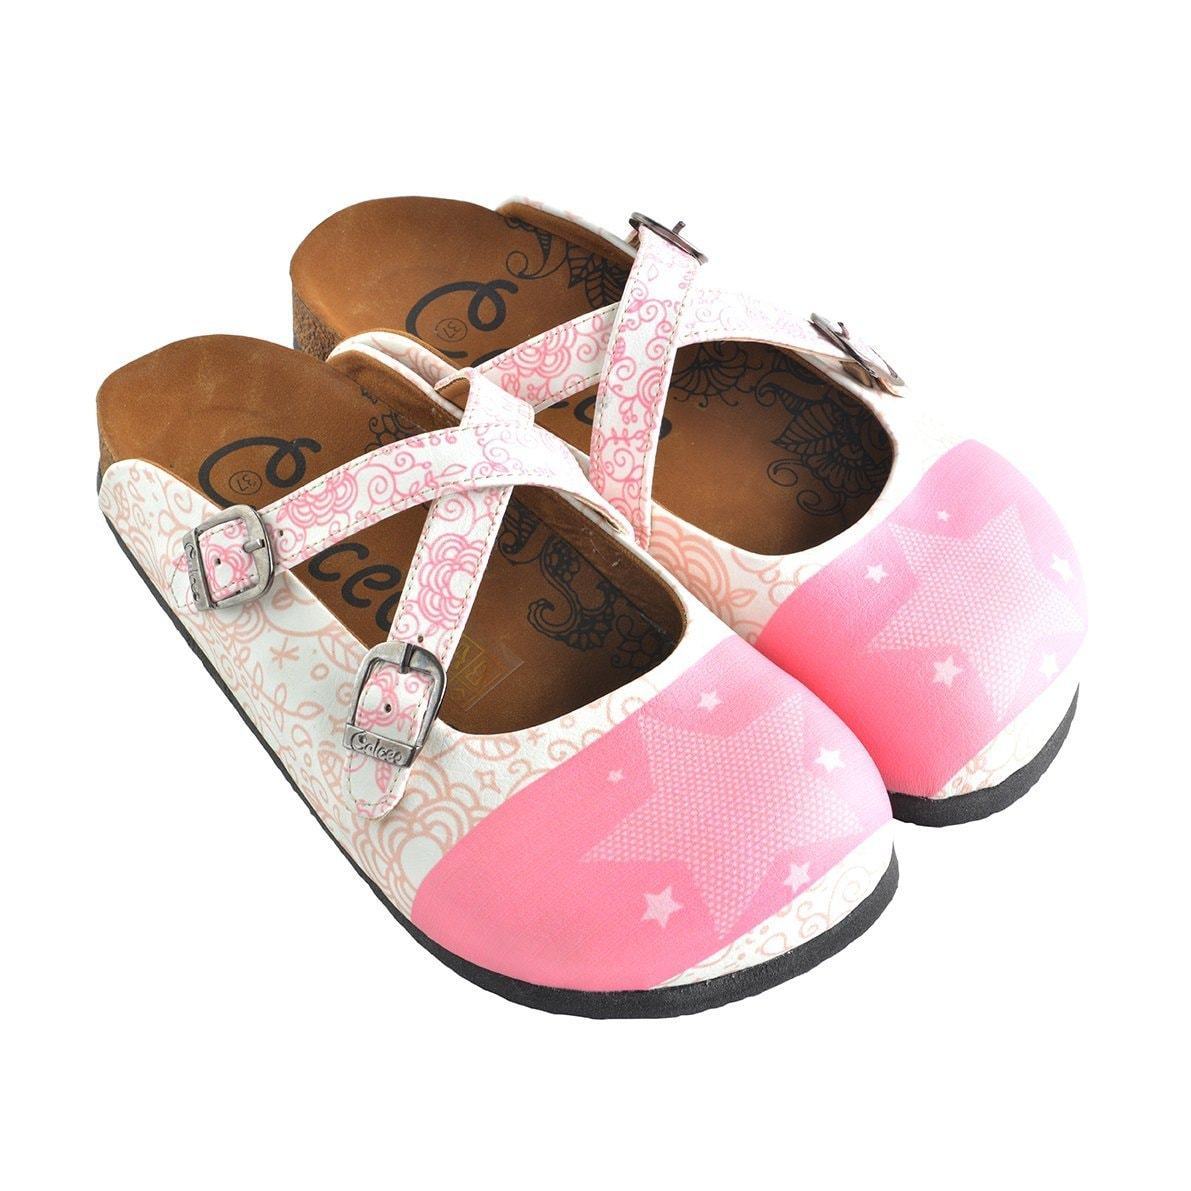 Pink & White Star Clogs WCAL154 (737671053408)